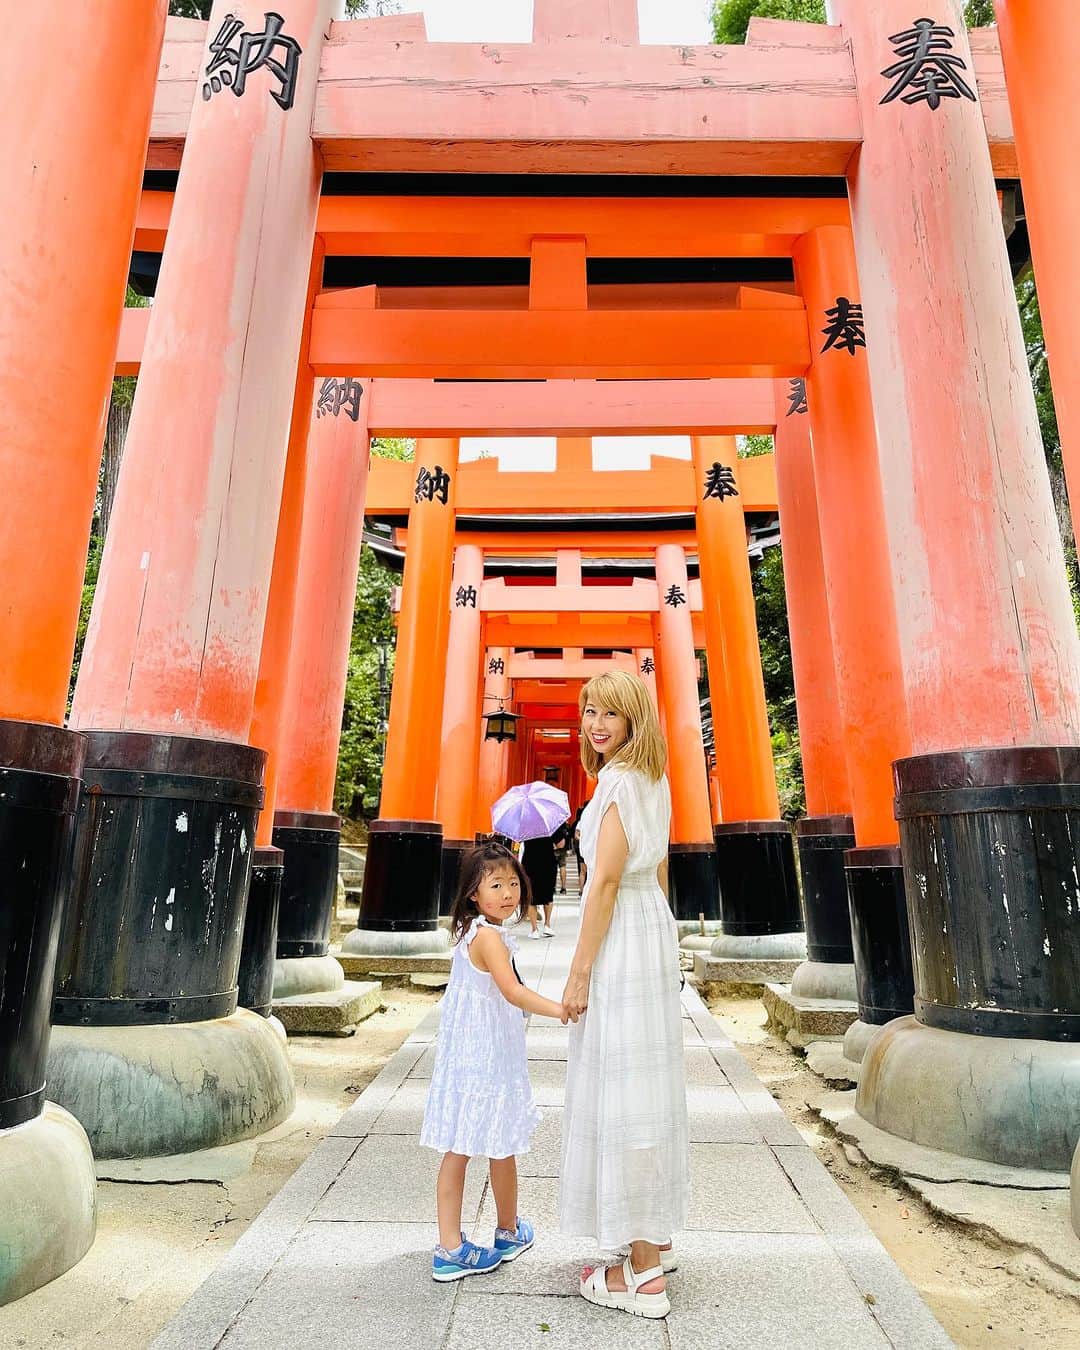 吉田ちかのインスタグラム：「Had so much fun visiting Osaka & Kyoto last weekend!  We were busy with events and meetings so we were able to do too much sightseeing, but we did make it out to see the iconic Senbon Torii at Fushimi Inari Shrine.   I’ve always wanted to see this in person!   As with any iconic sightseeing spot though, it was much more crowded than you would think from all the photos, but it was still a sight to see! And OMG I couldn’t believe how many foreign visitors there were! So happy to see everyone coming out to Japan!!  先週末は関西を満喫させていただきました！  イベントや打ち合わせ、お友達に会ったりで忙しくてあまり観光はできませんでしたが、前から気になっていた伏見稲荷大社に行けて大満足！  有名な観光スポットあるある - 実際行くと観光客だらけでしたがw やっと実物を見れてよかった😆しかし、京都の外国人観光客の方の多さにびっくり！！こんなに沢山の方々が世界中から日本に遊びにきてくれていて嬉しいですね！！  他の写真の一言コメント↓ 大阪で @shinsaku_samurai さんに素敵なお店を紹介してもらった😆 @sumikappo.hirac  📸京都のKittyちゃんに興奮するプリン 📸イラストレーターの @amami_illust_kyoto さんと夜中の打ち合わせ 📸Ace Hotelの中庭が素敵だった✨ 📸京都水族館が最高によかった👍 📸鉄道博物館もめっちゃオススメ🚃  📸クローバーも色々とわかるようになってきて、旅を楽しみ始めている様子 (より大変になったけどw）  Posted from Cebu🇵🇭 フィリピンの様子もシェアしますね！」